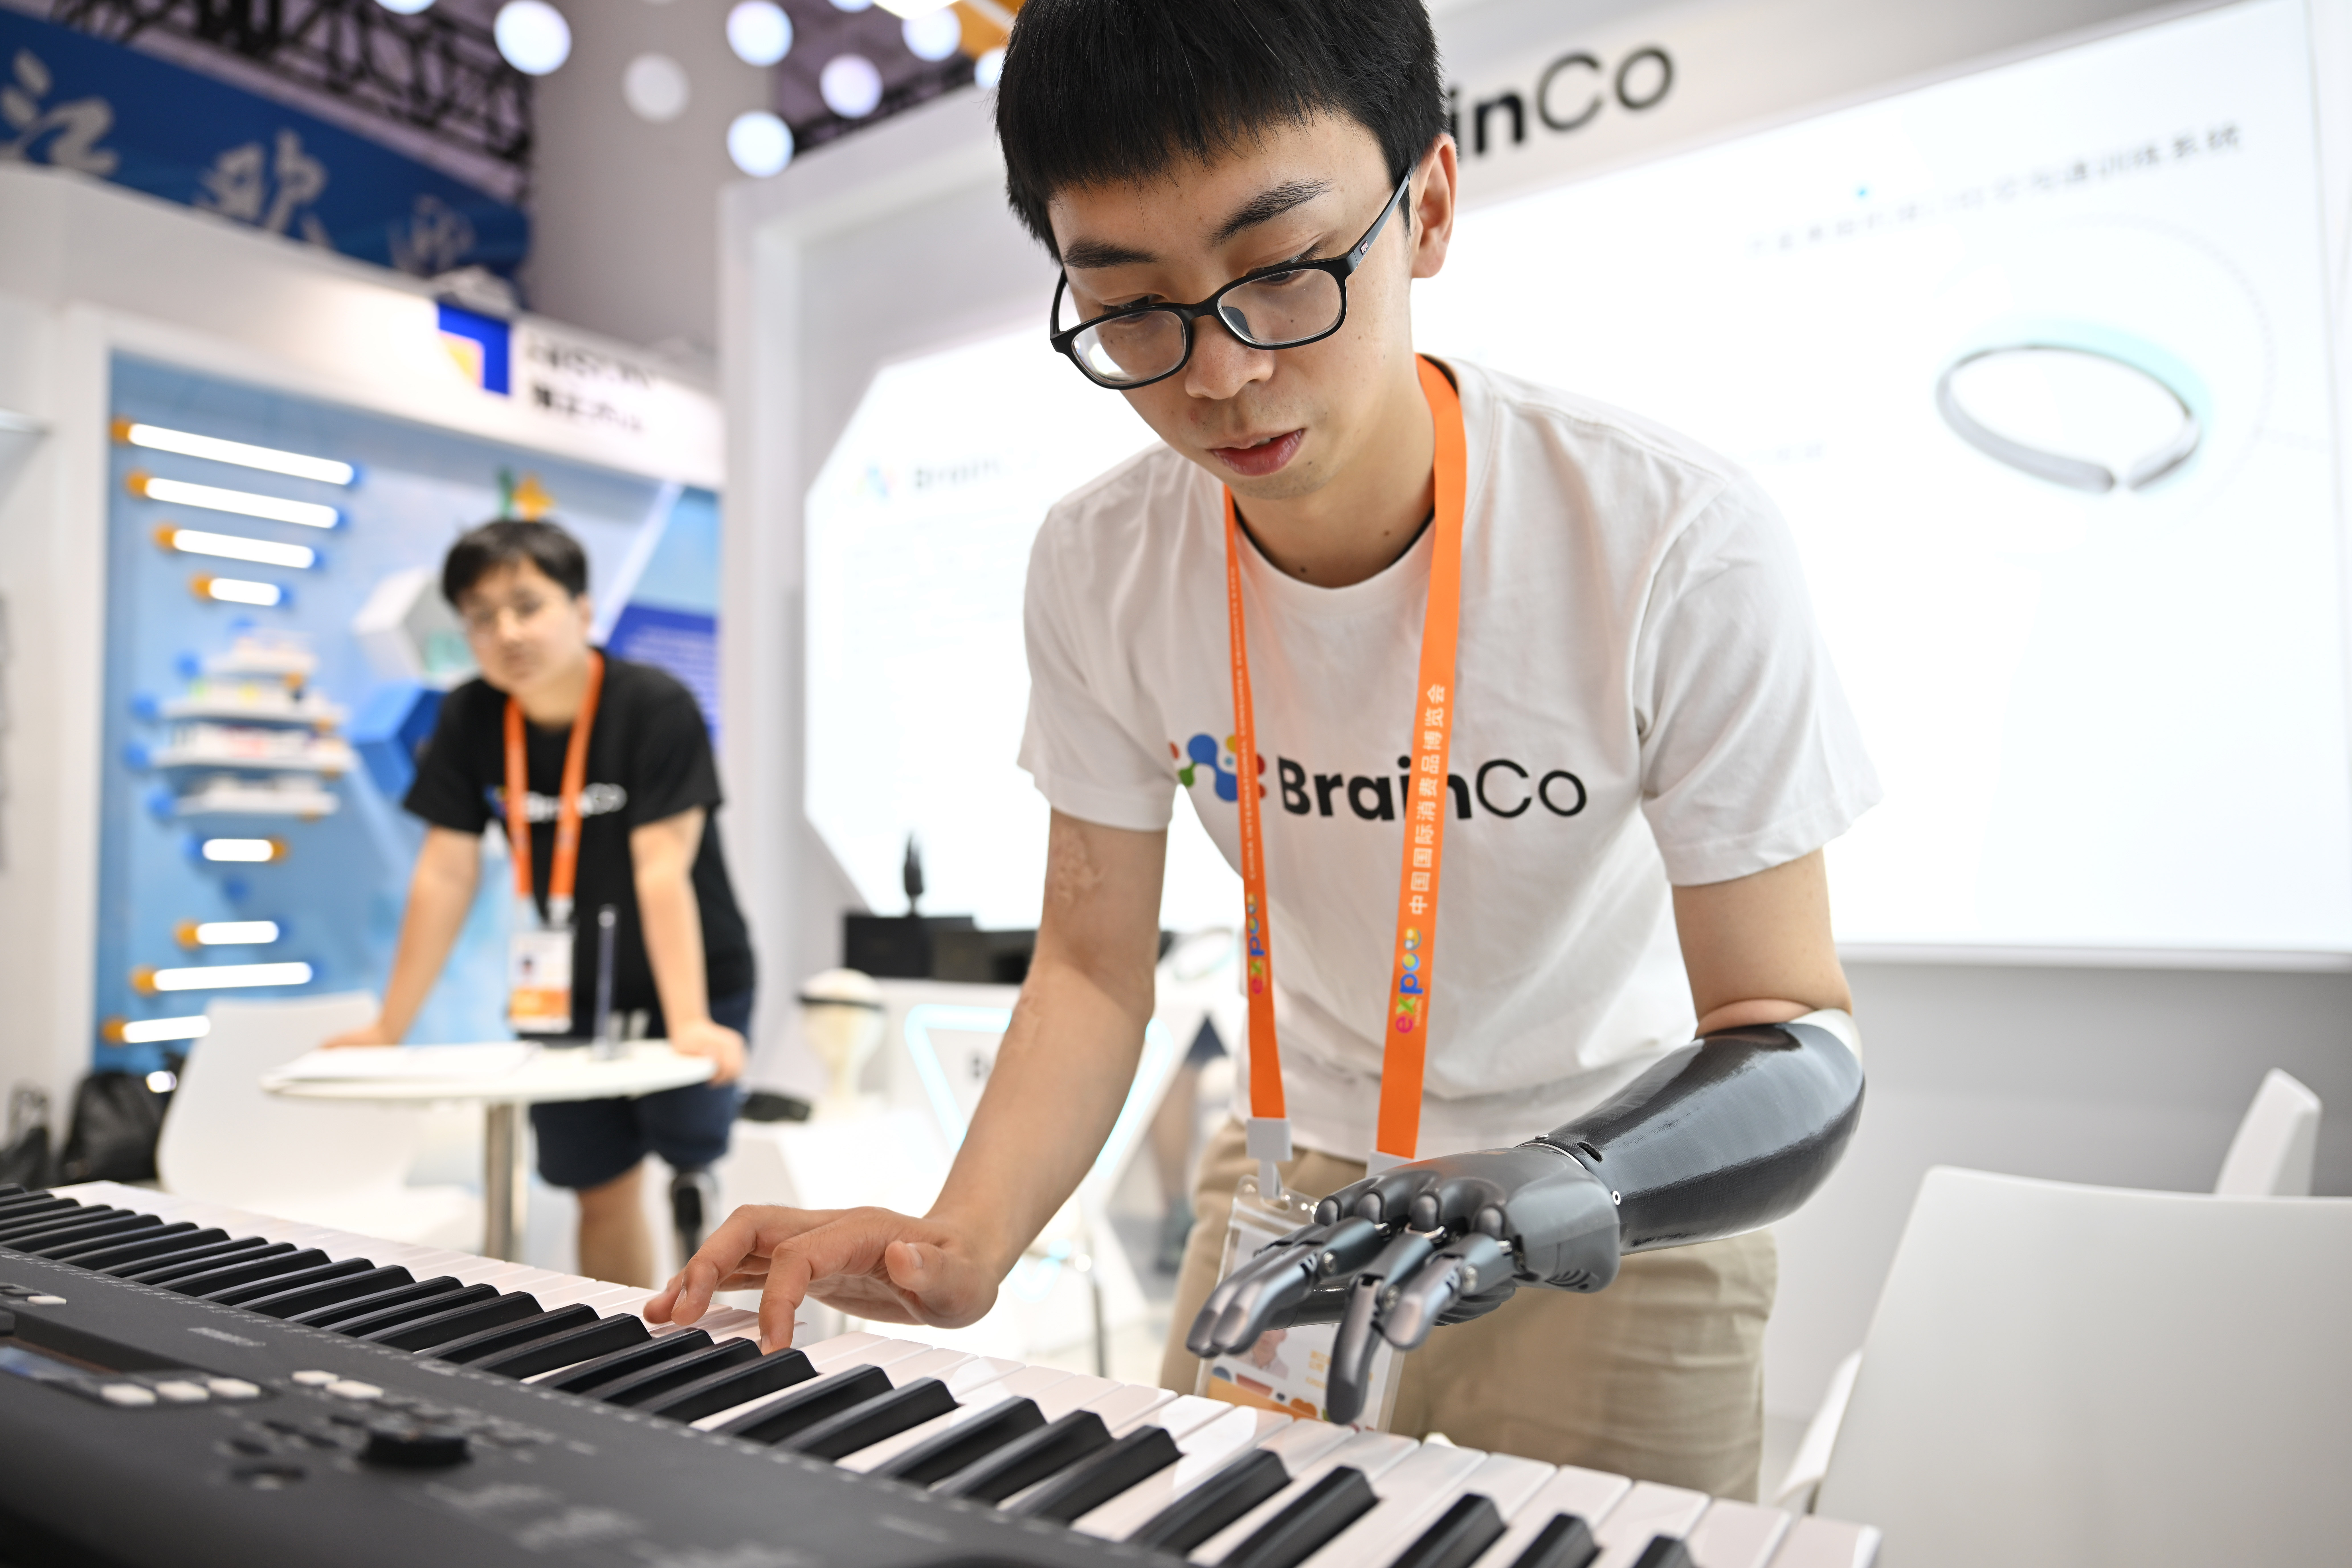 BrainCo, a Boston-based cognitive training technology startup, showcases its prosthetic hand's capability, usability, and affordability, April 11, 2023. /Xinhua